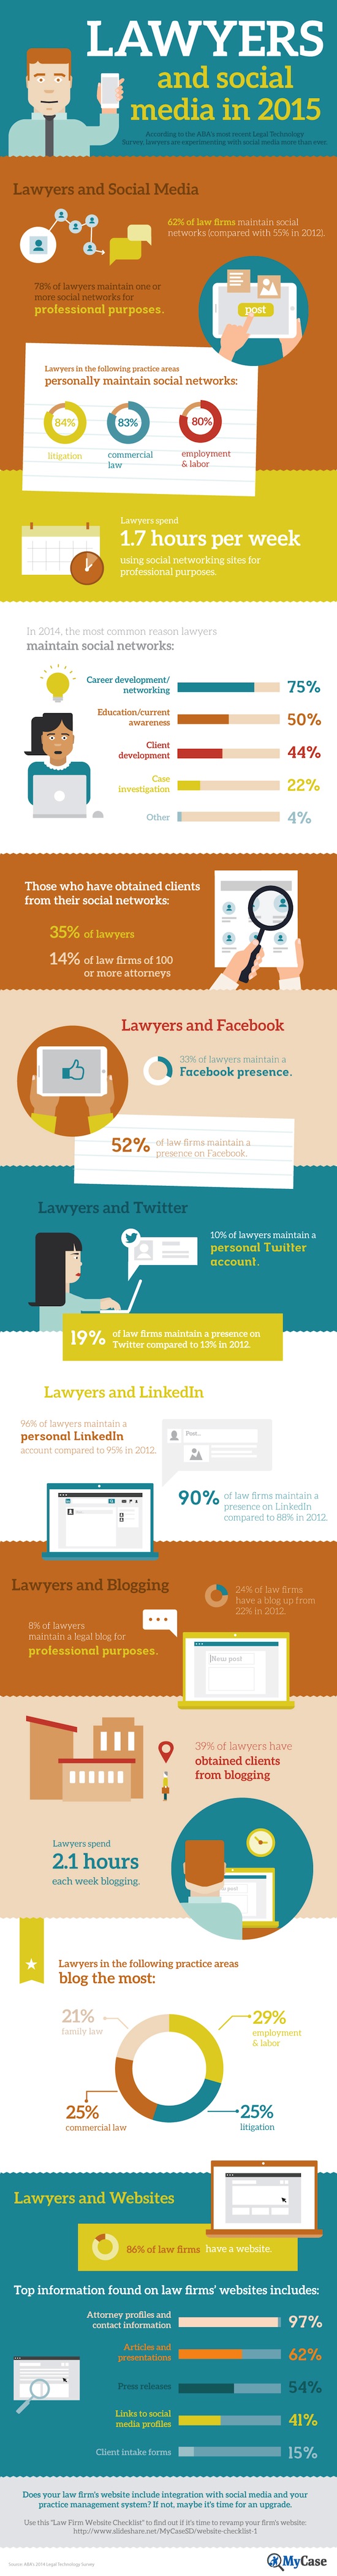 Infographic: How lawyers are using social media ?